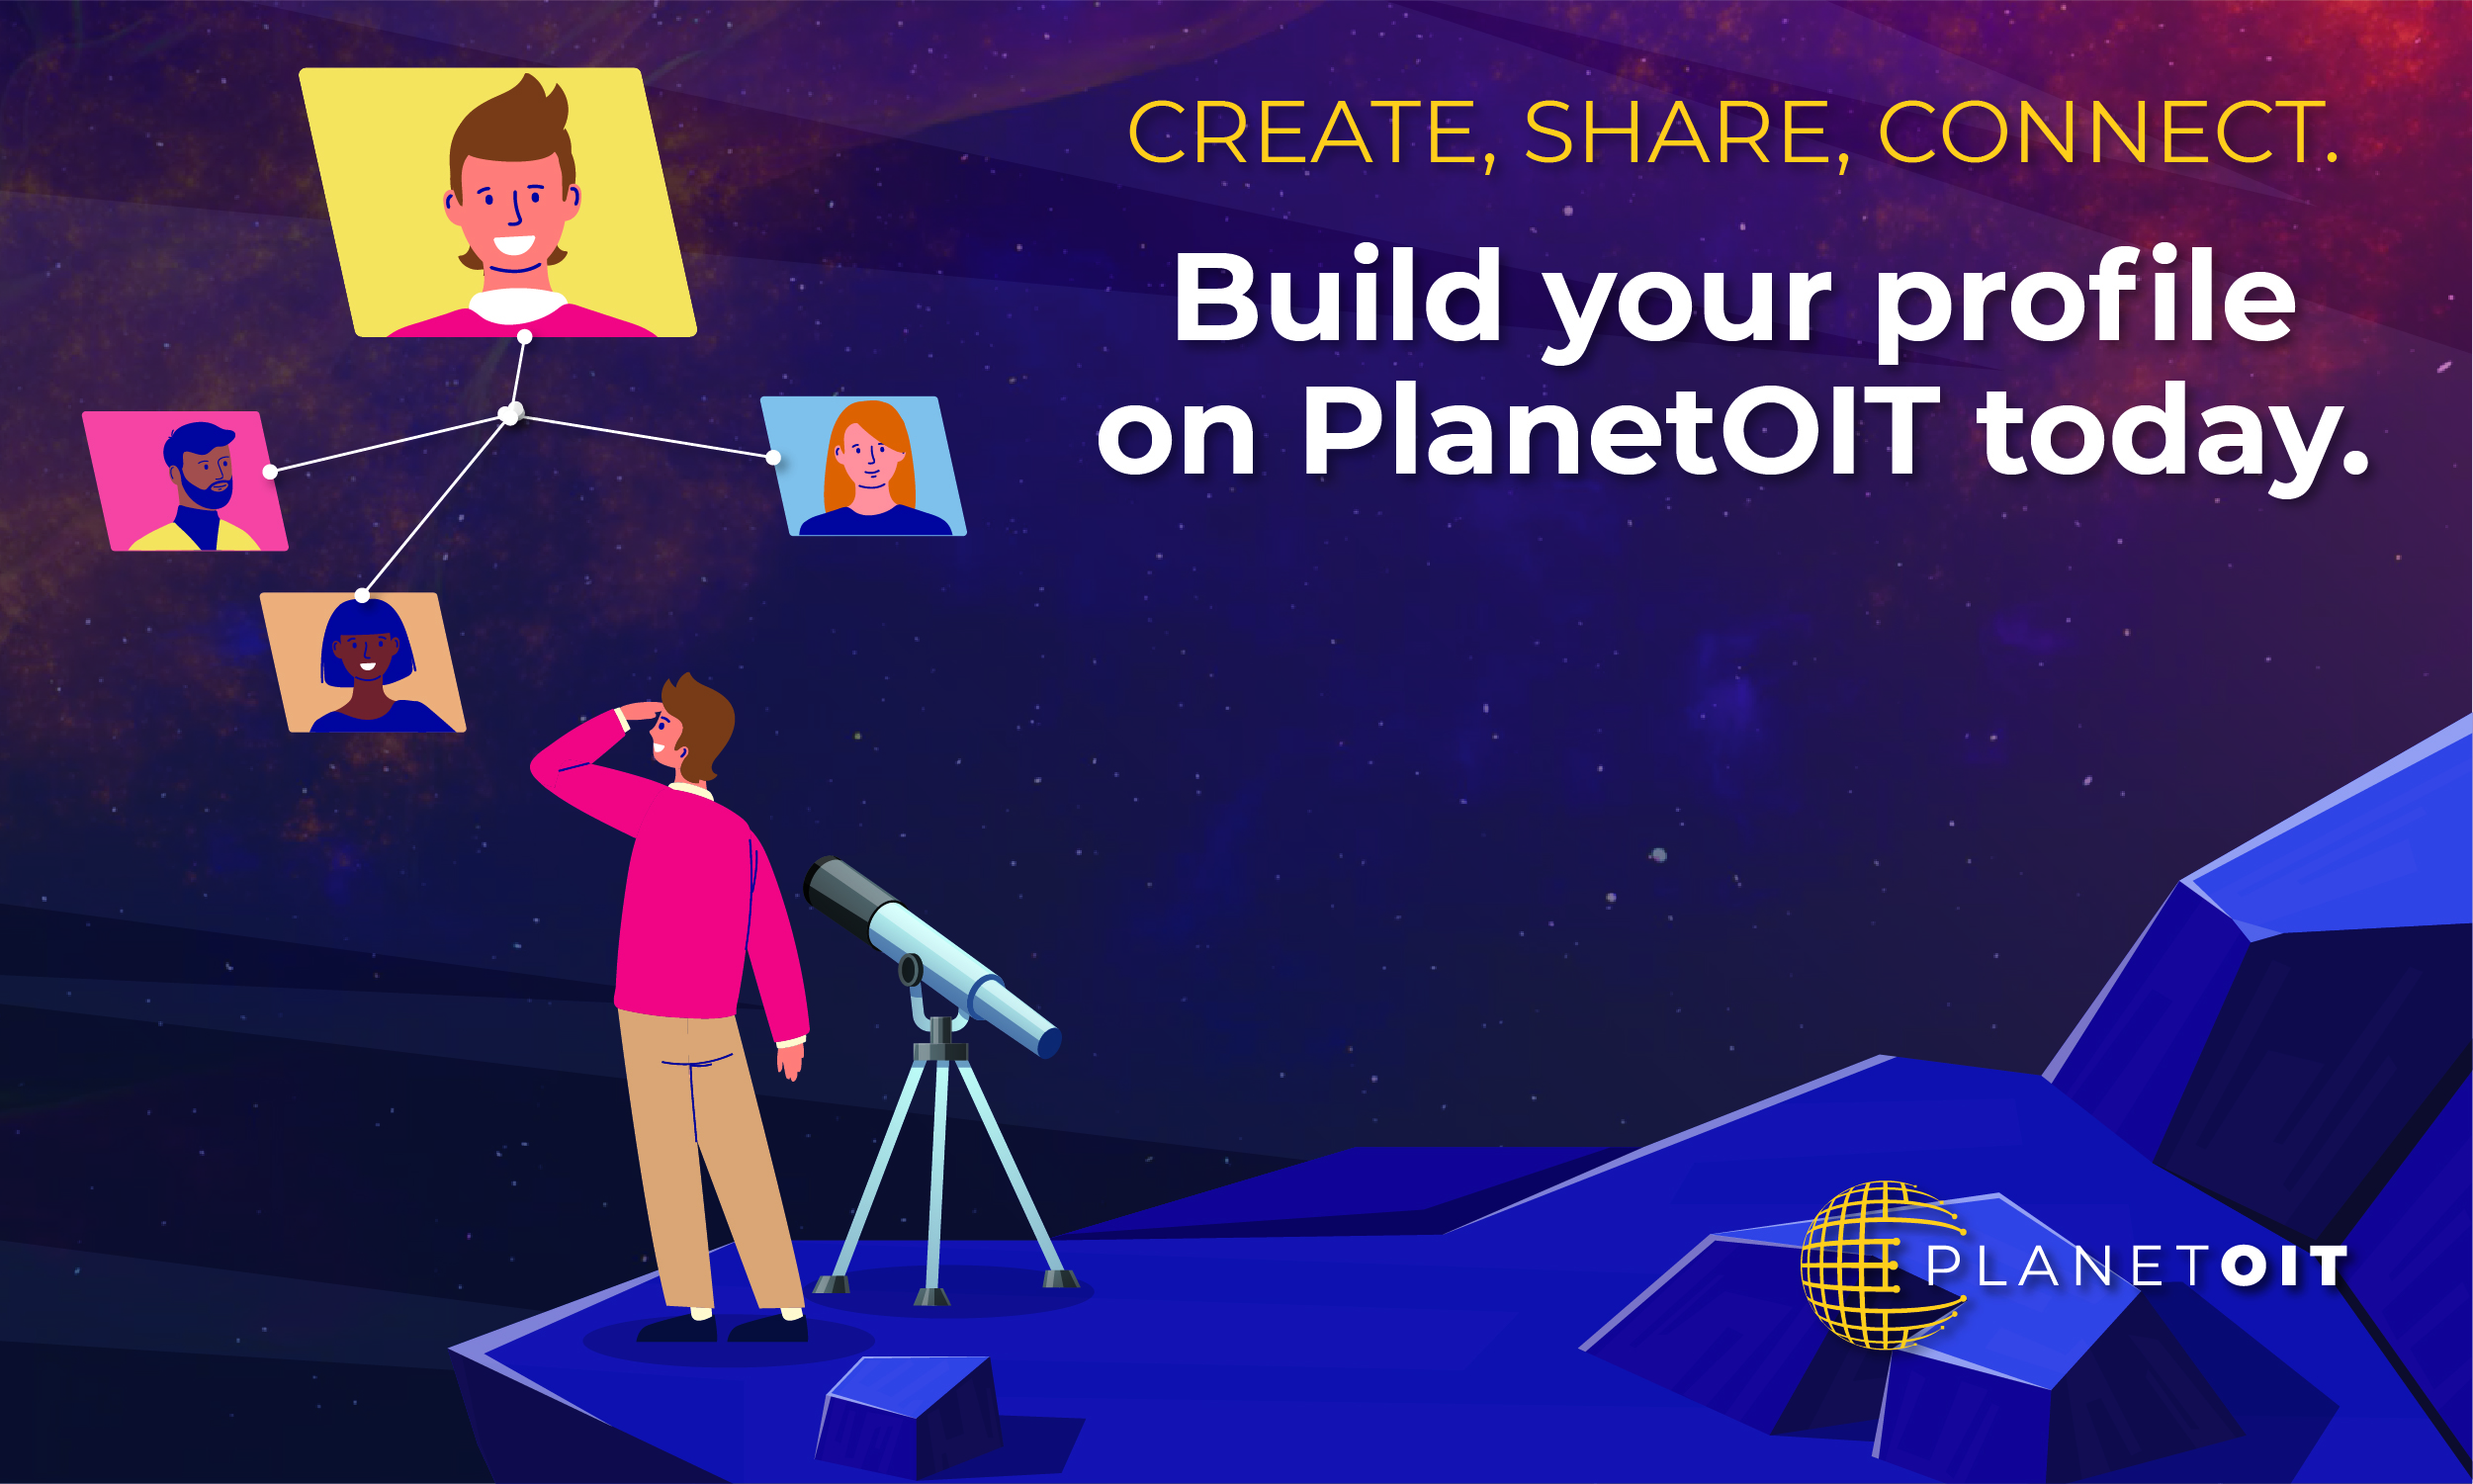 Graphic of a person standing on a rock in space looking out at the stars at images of four other people networked by lines. The cutline reads "Create, Share, Connect. Build your profile on PlanetOIT today."